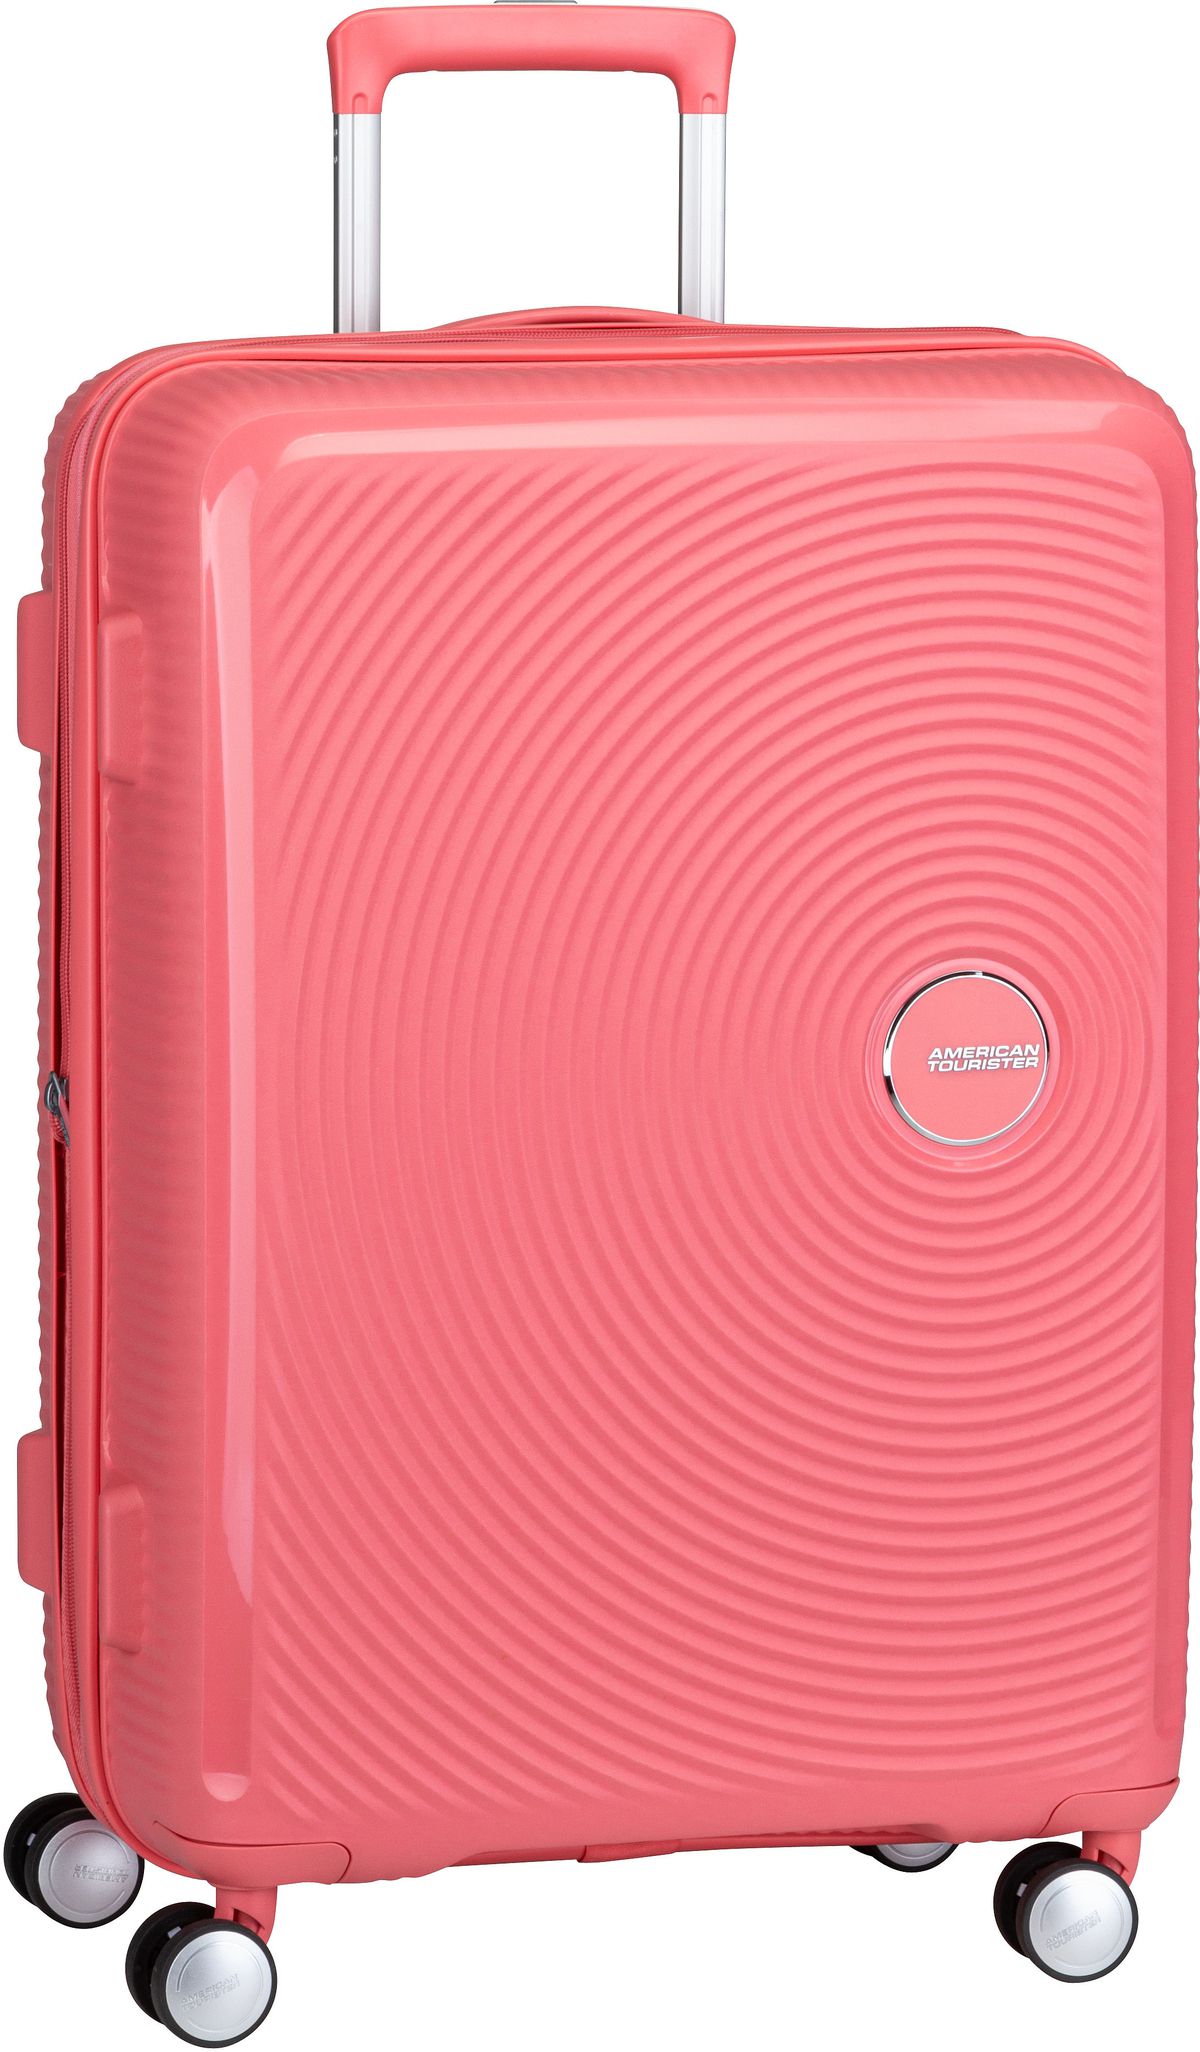 American Tourister  SoundBox Spinner 67 EXP - Koffer mit 4 Rollen - Pink (Sun Kissed Coral)